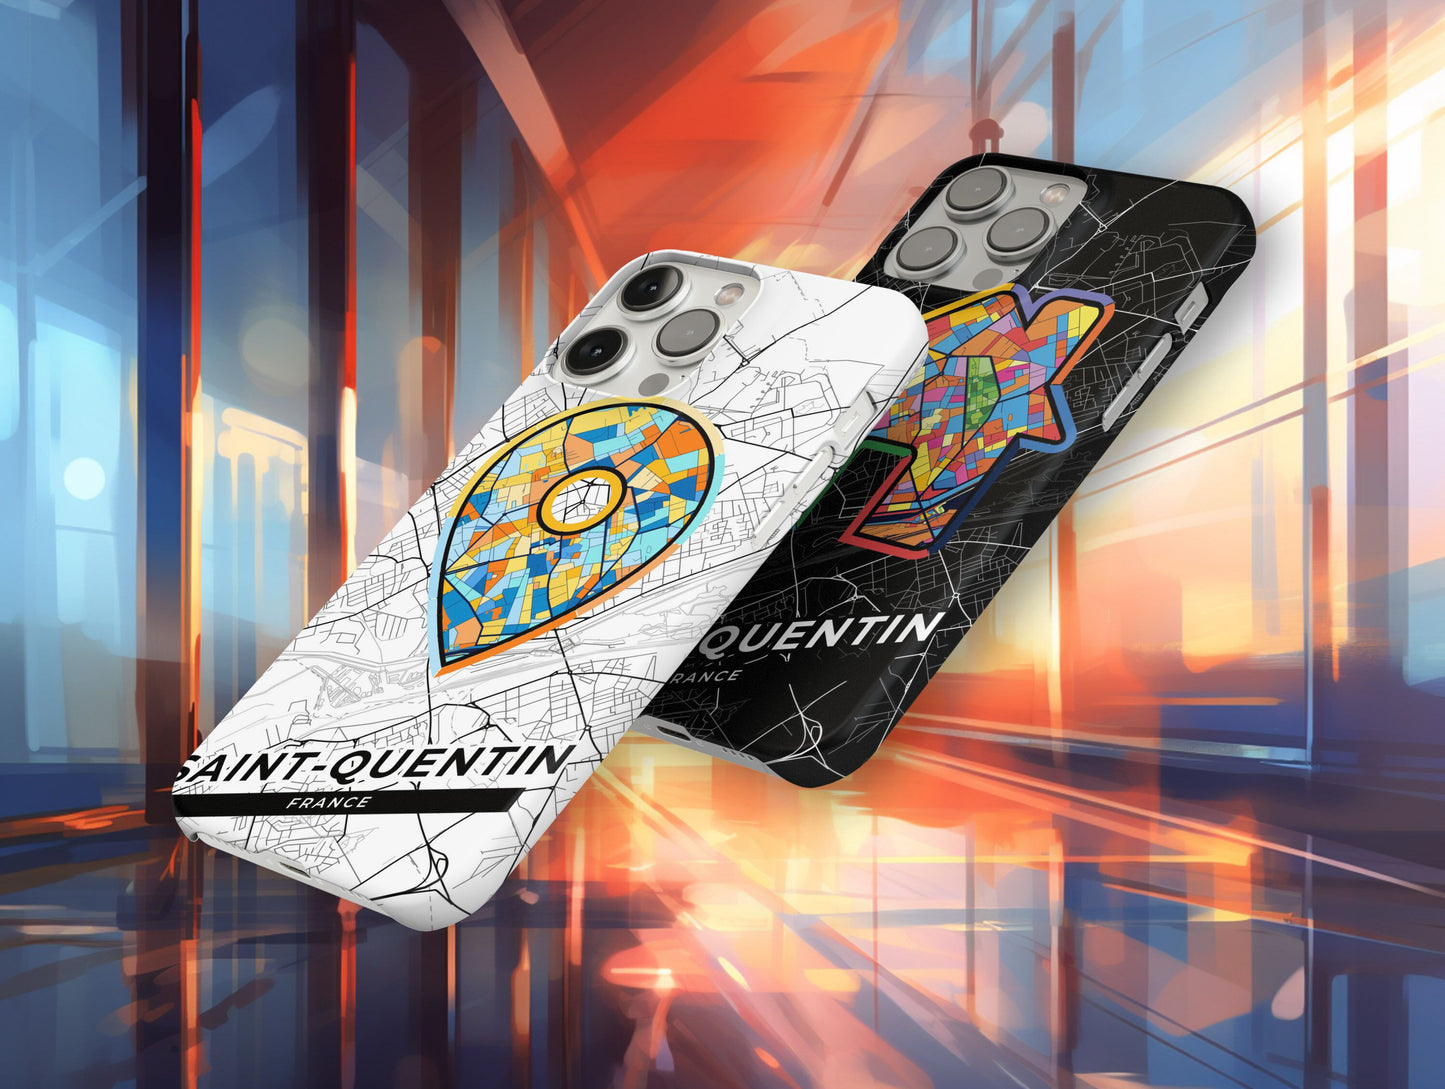 Saint-Quentin France slim phone case with colorful icon. Birthday, wedding or housewarming gift. Couple match cases.